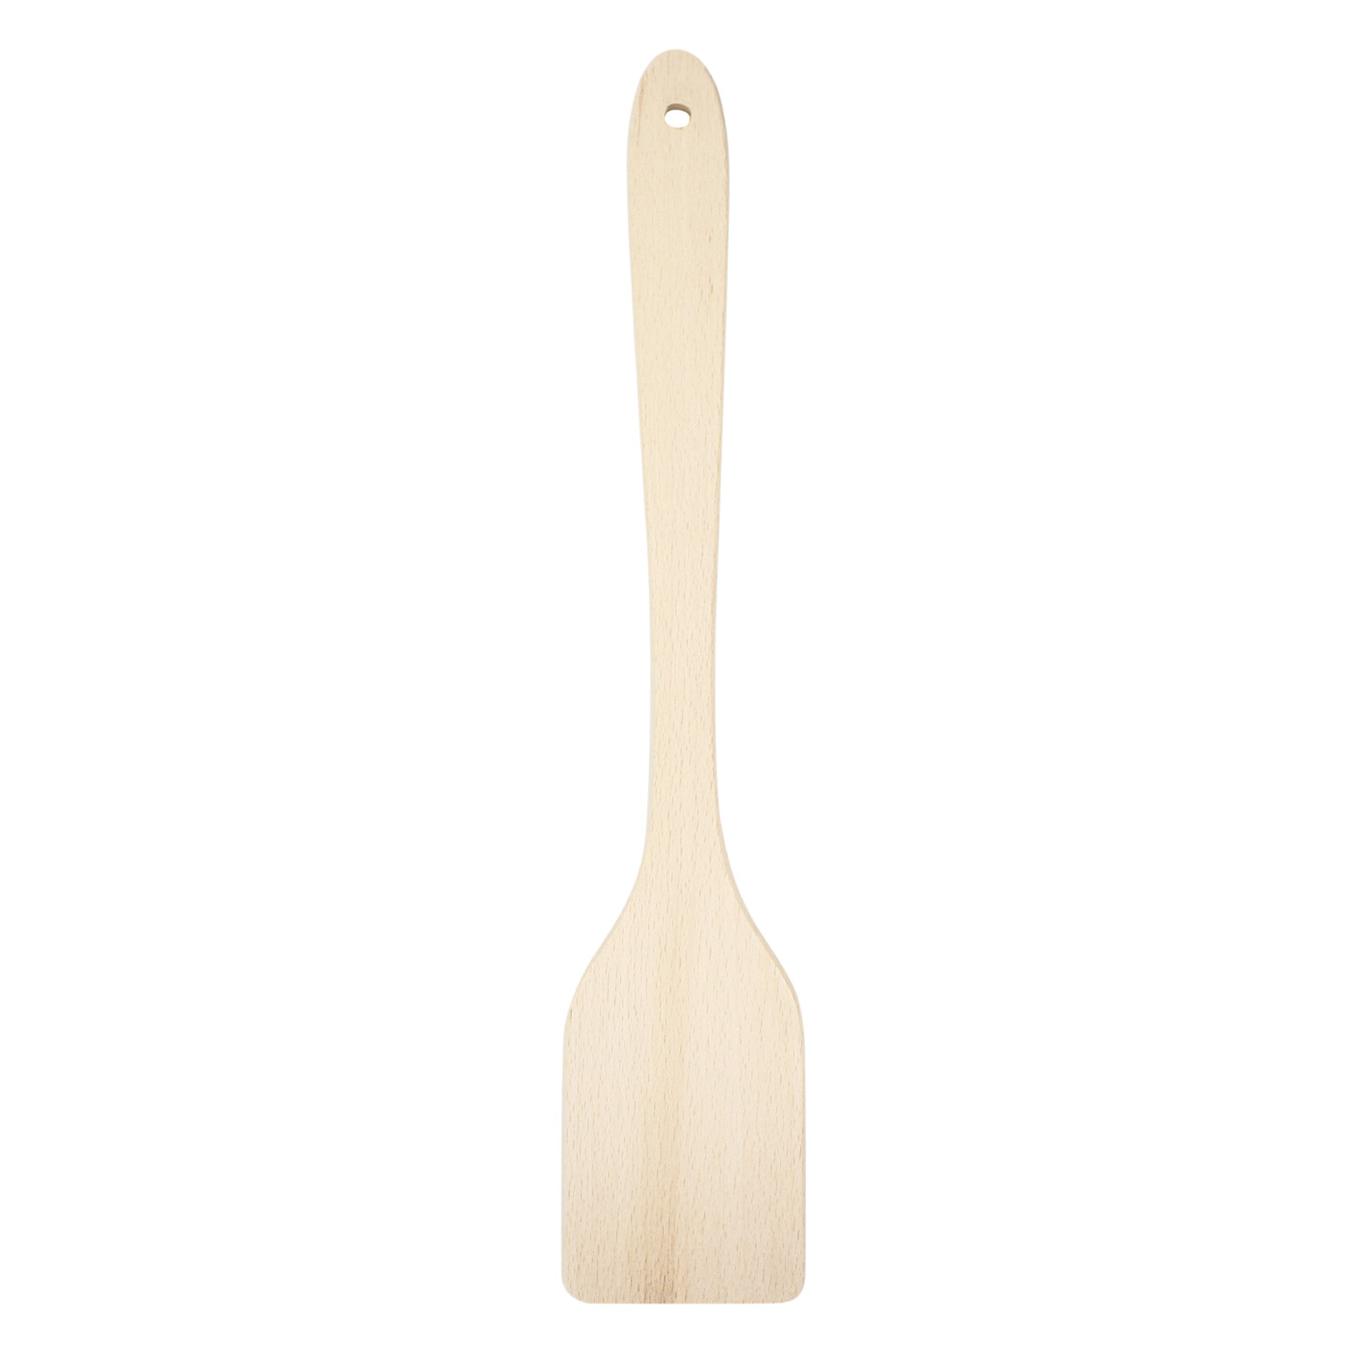 The kitchen spatula is large, 40cm